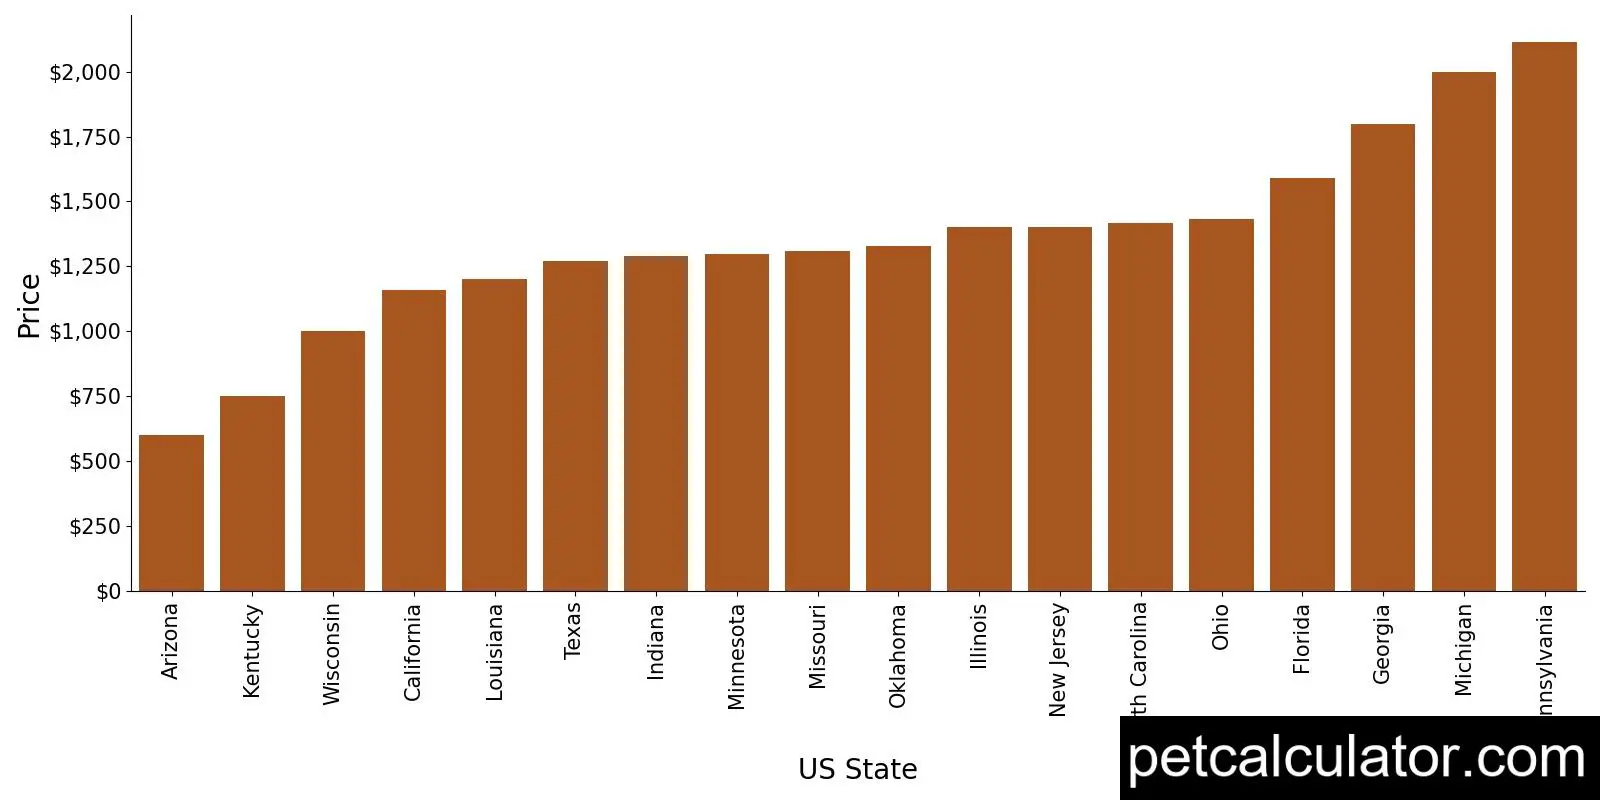 Price of Dalmatian by US State 